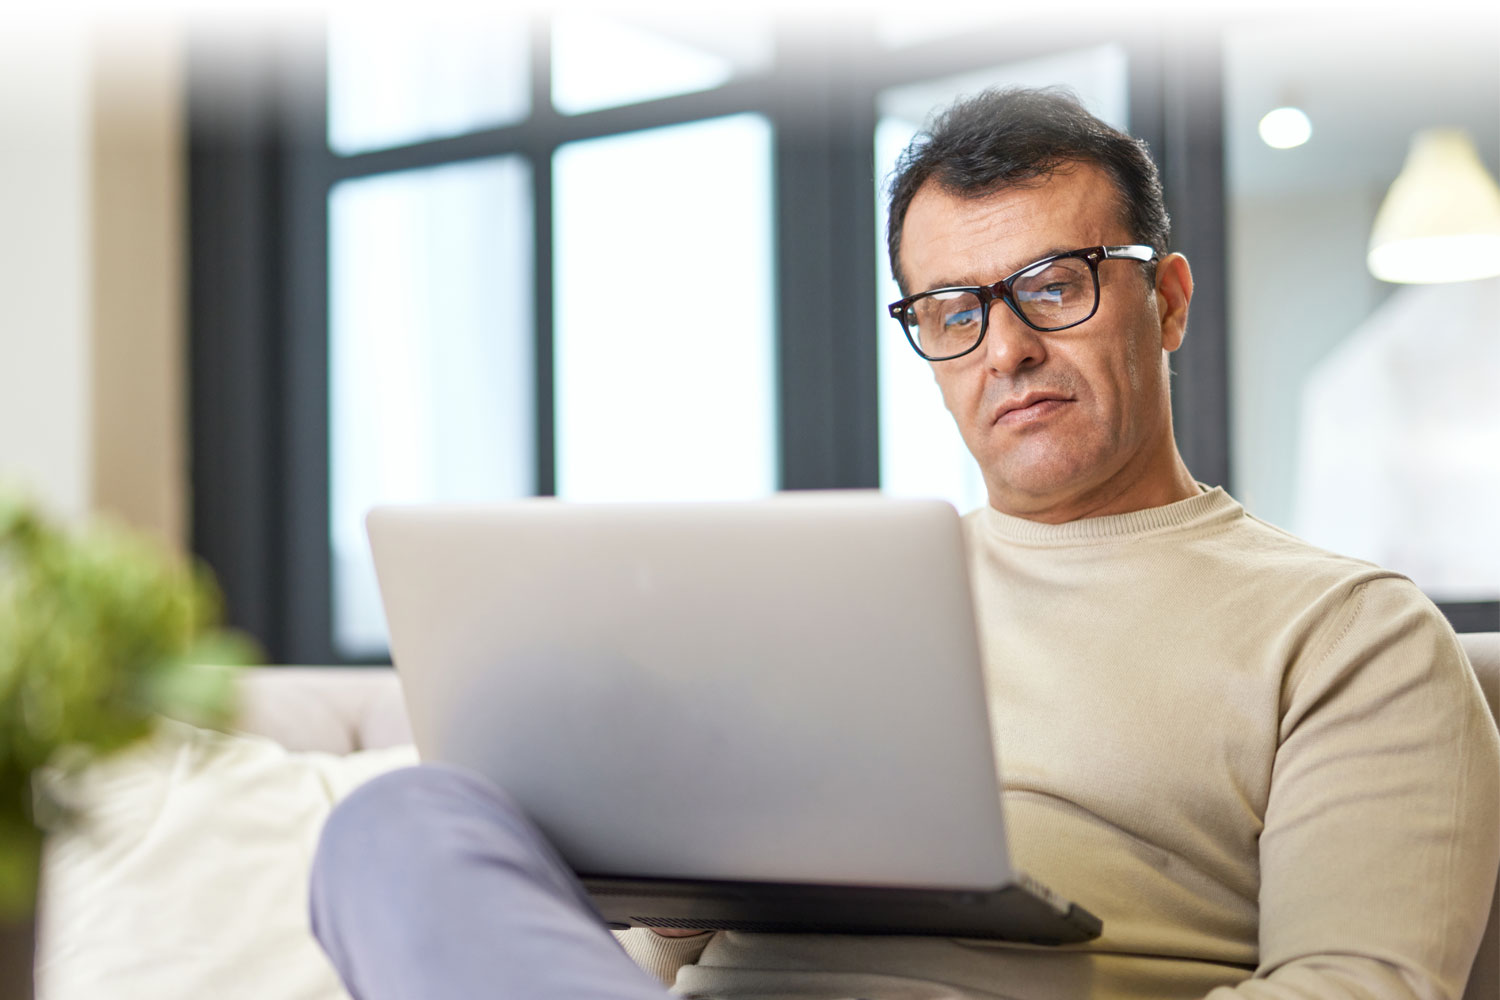 Man looking at a laptop on the couch